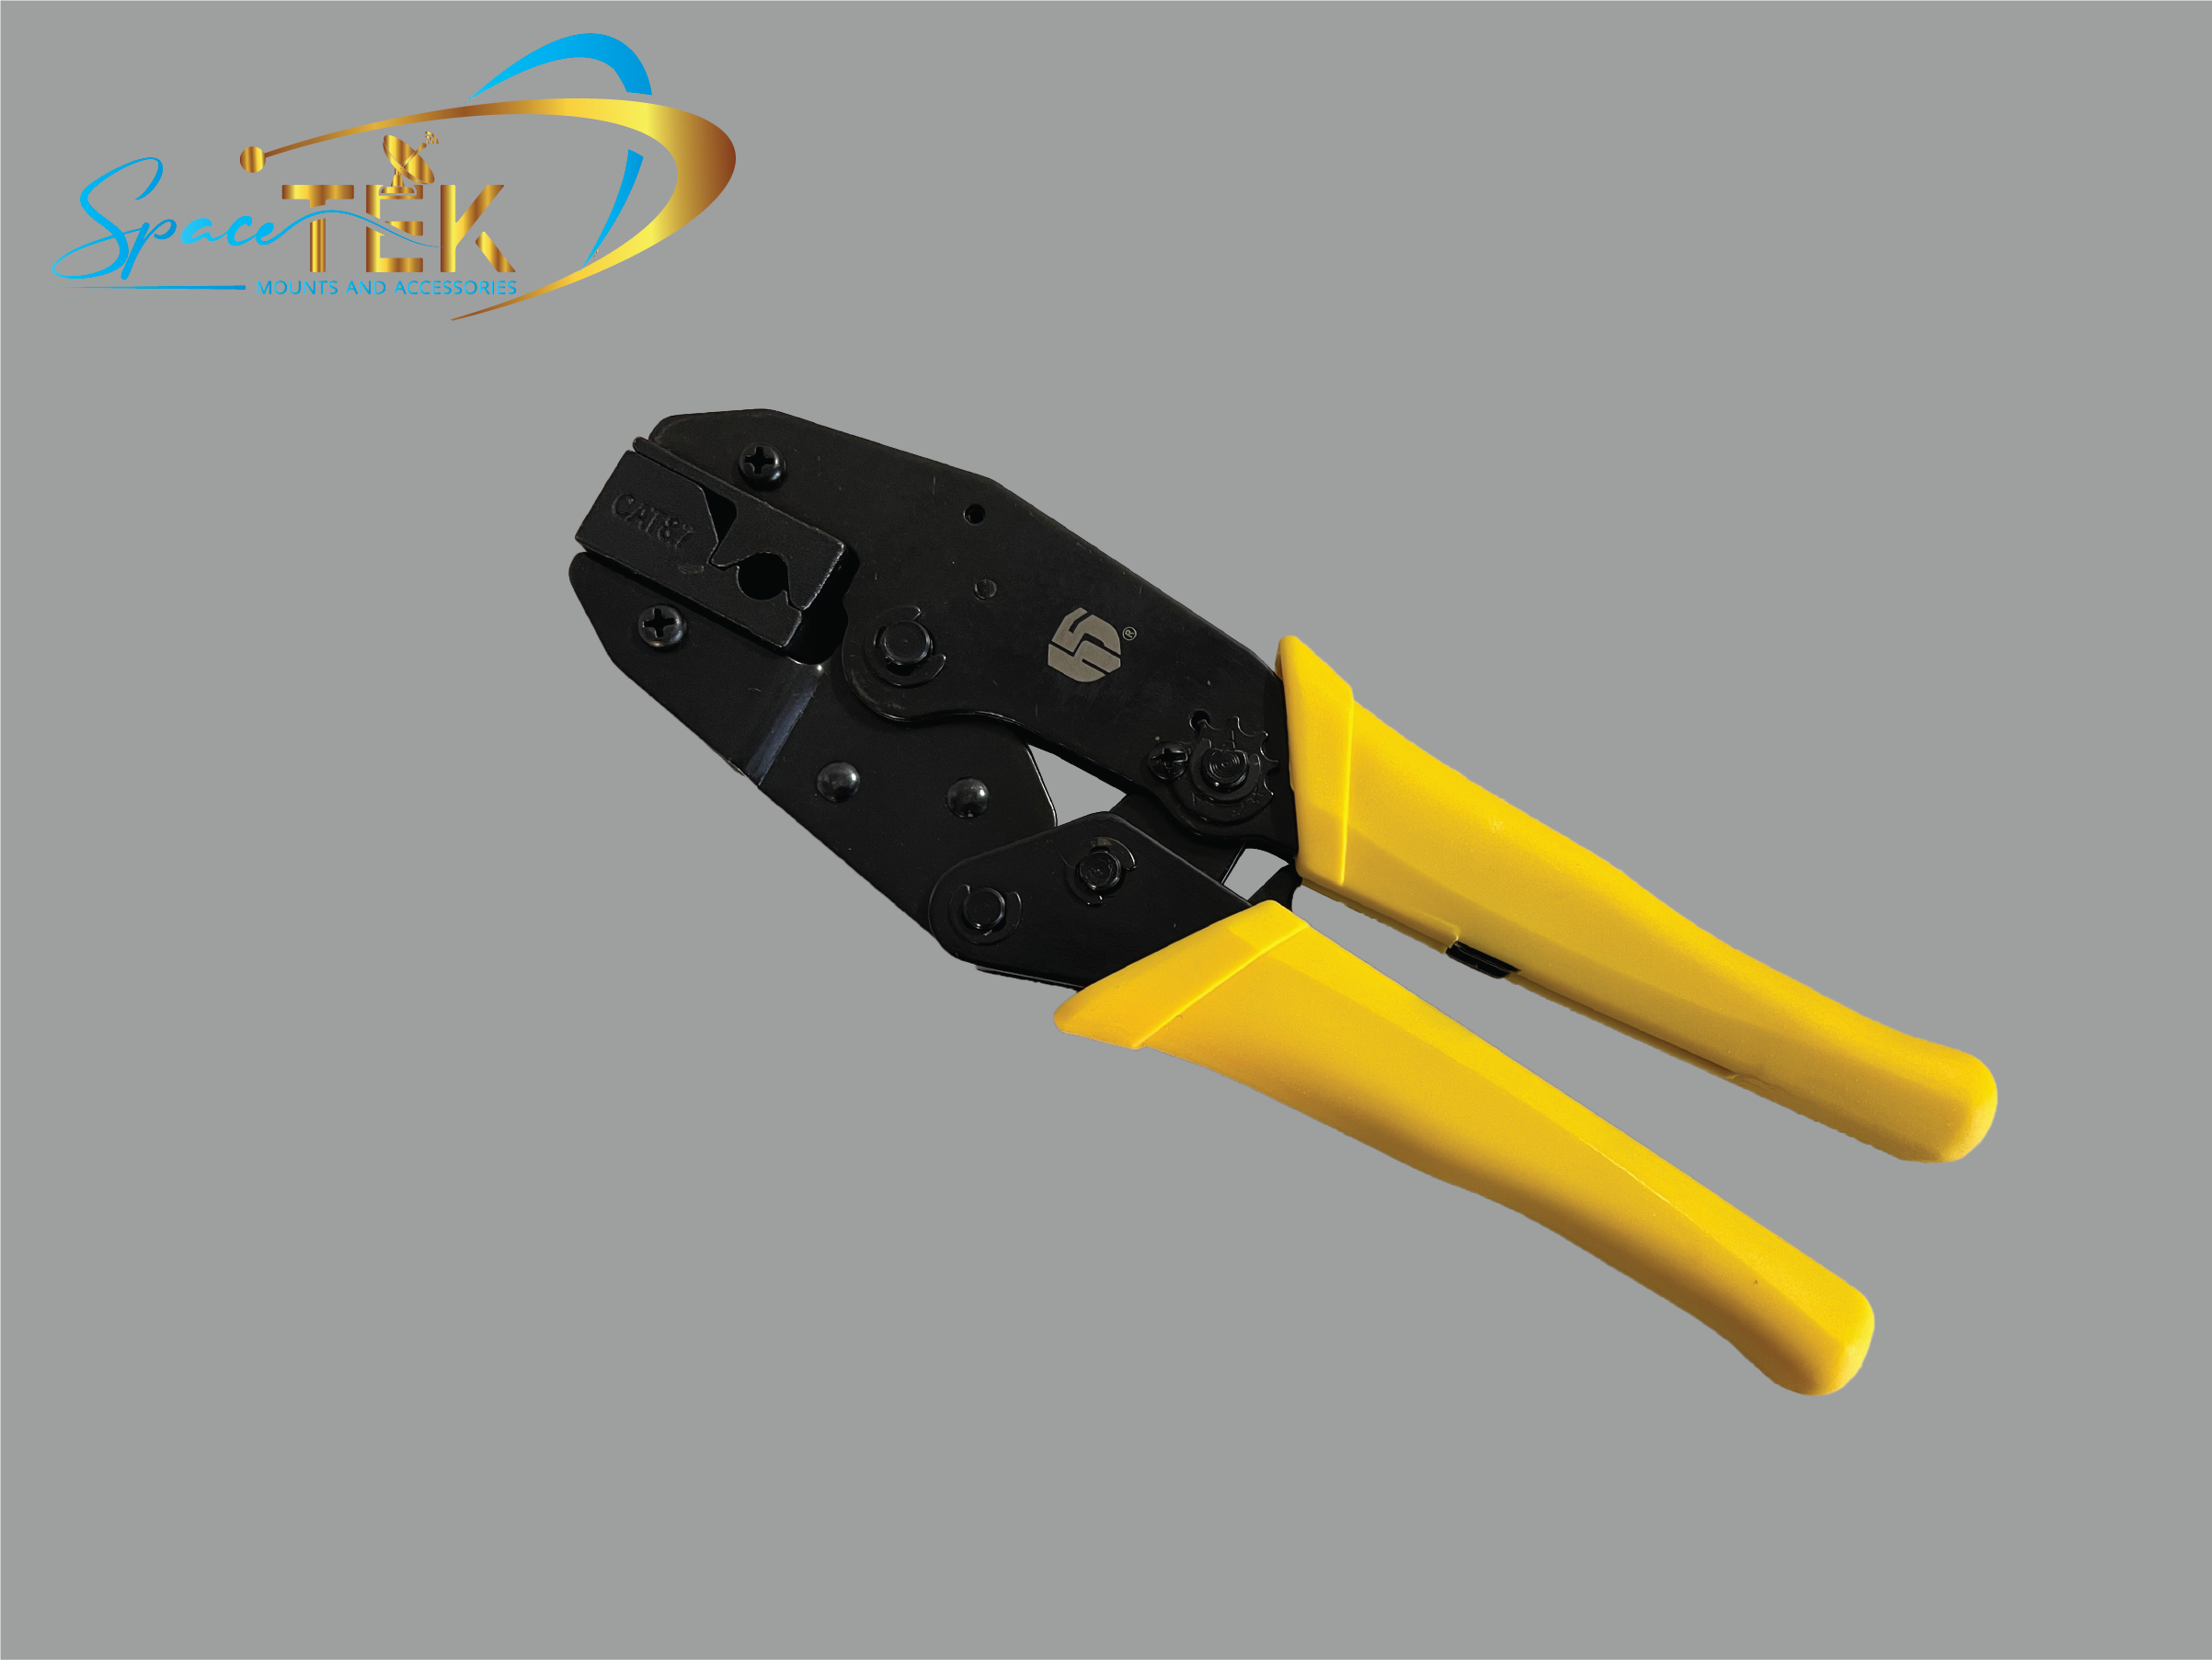 RJ45 Crimping Tool with 5 X Shielded Plug's